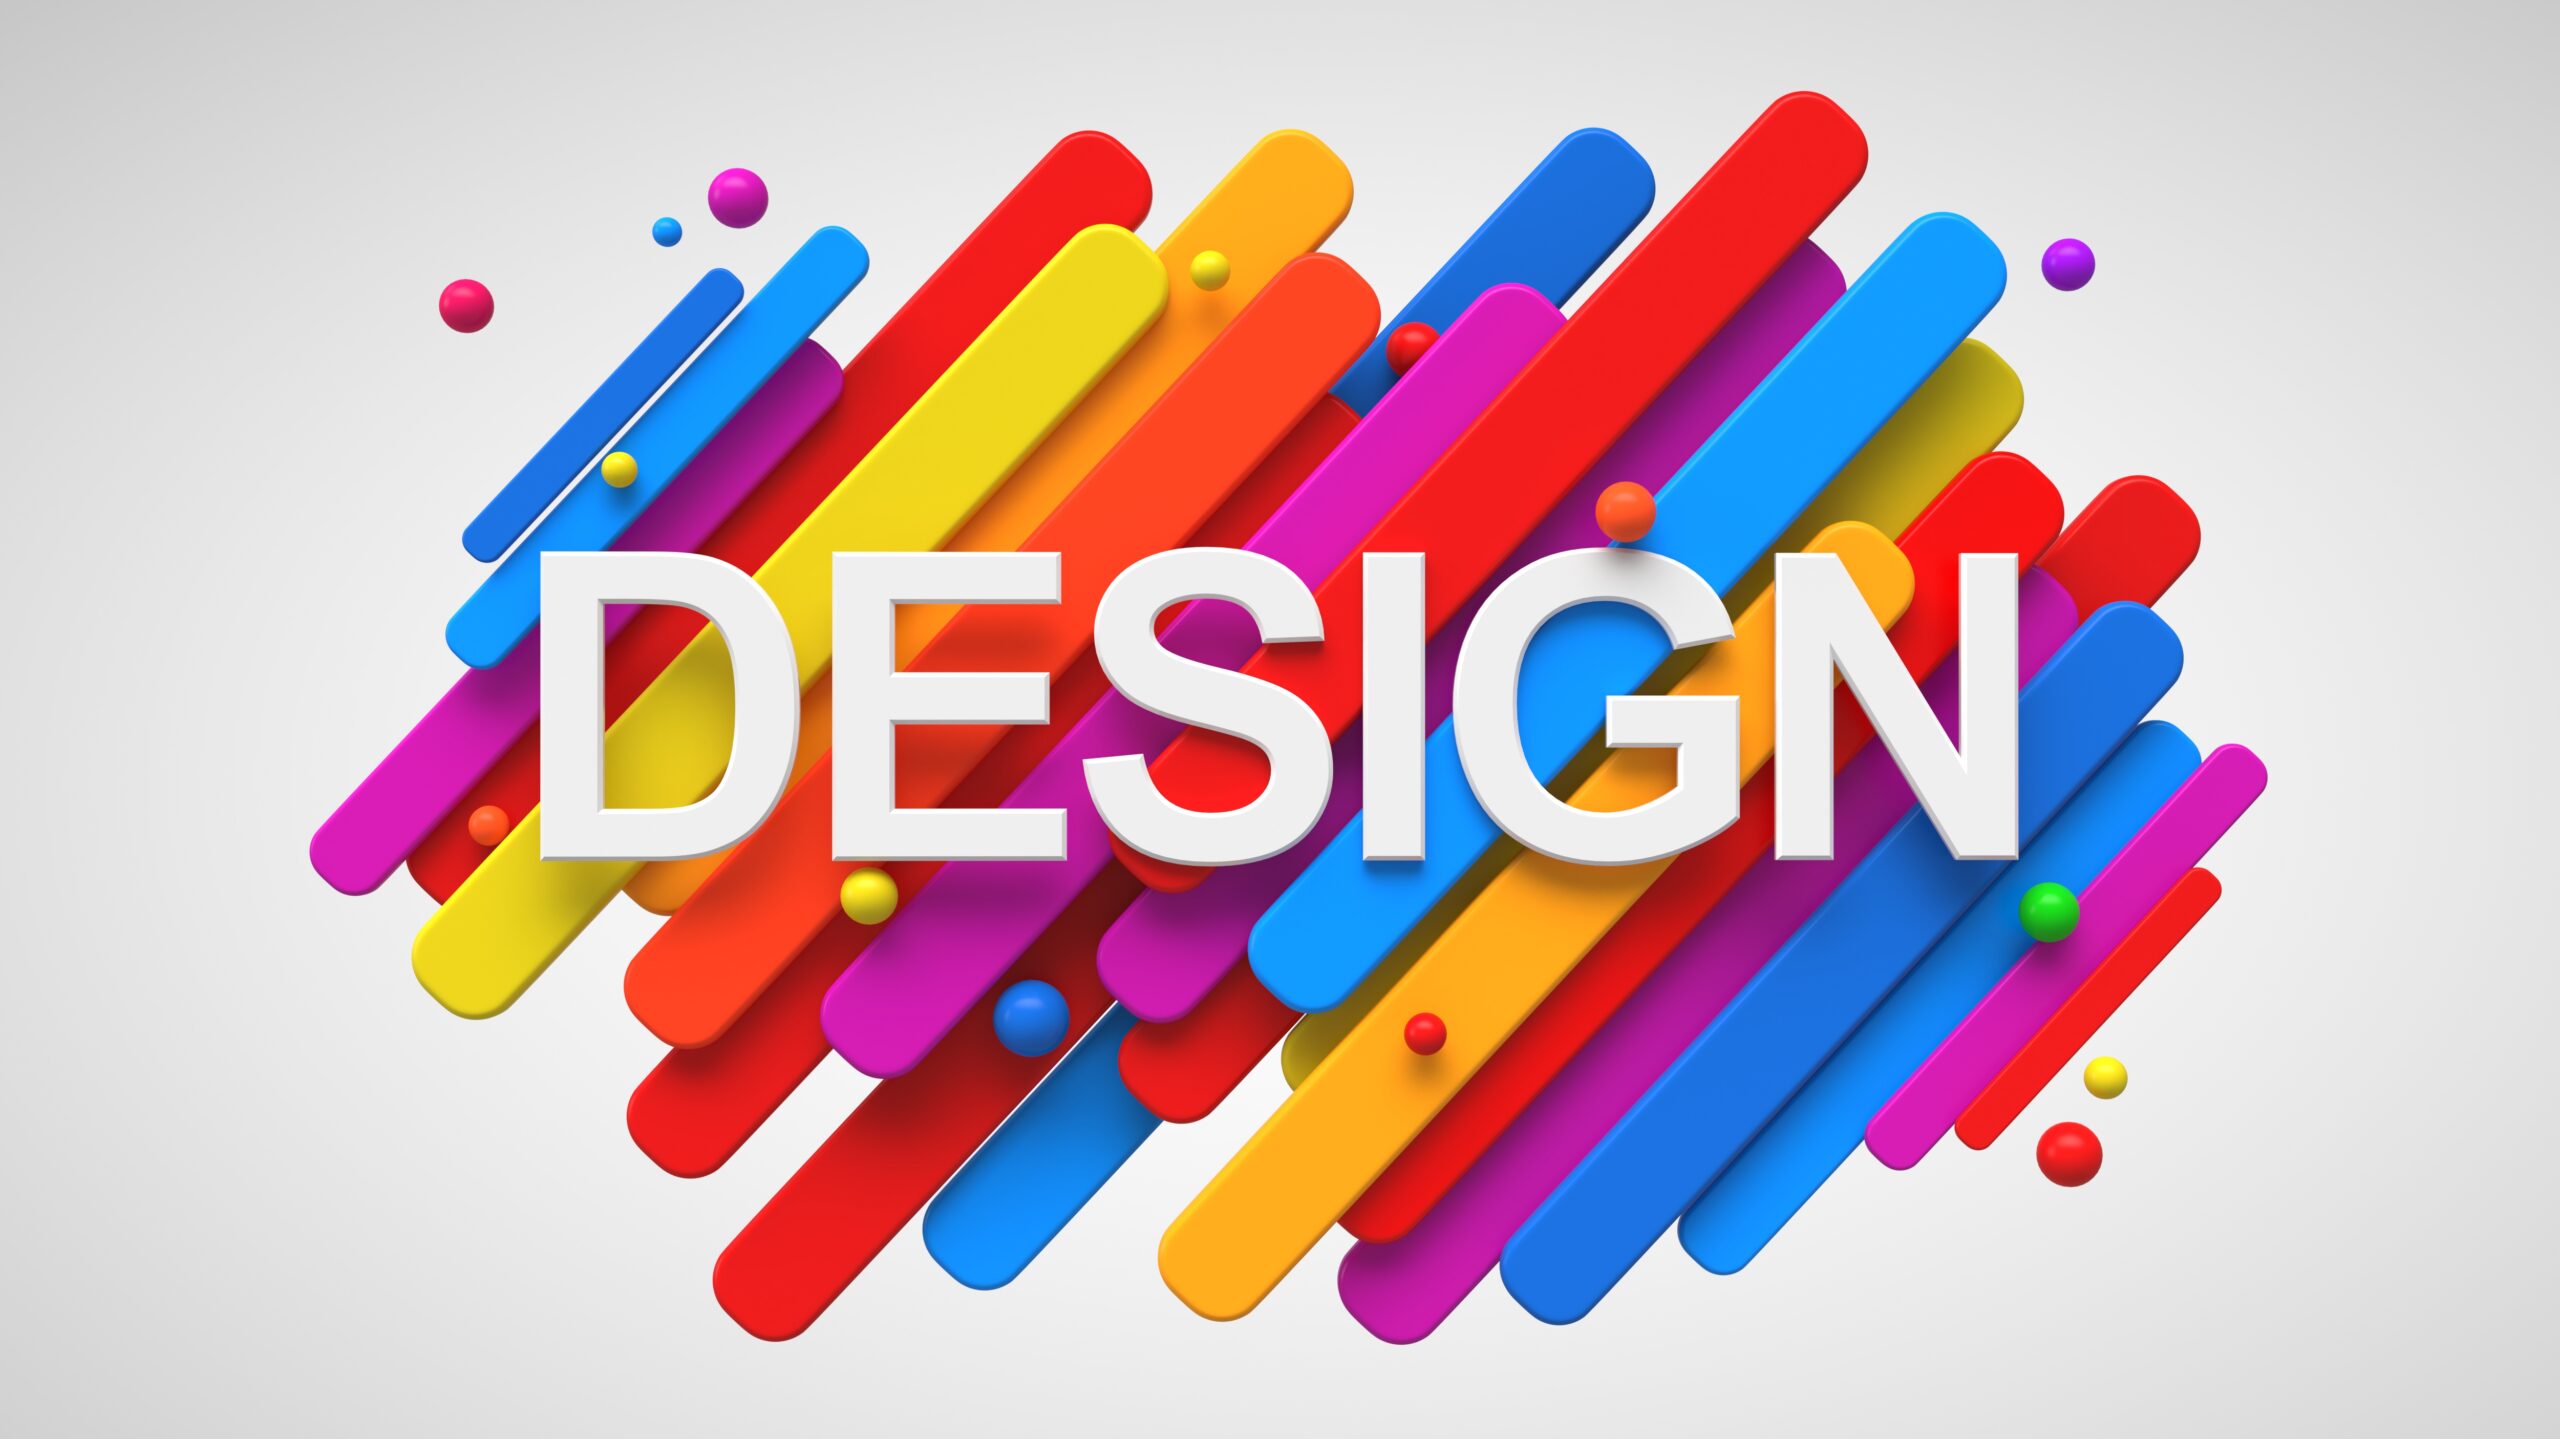 Word design written on top of colorful geometric 3d shapes.